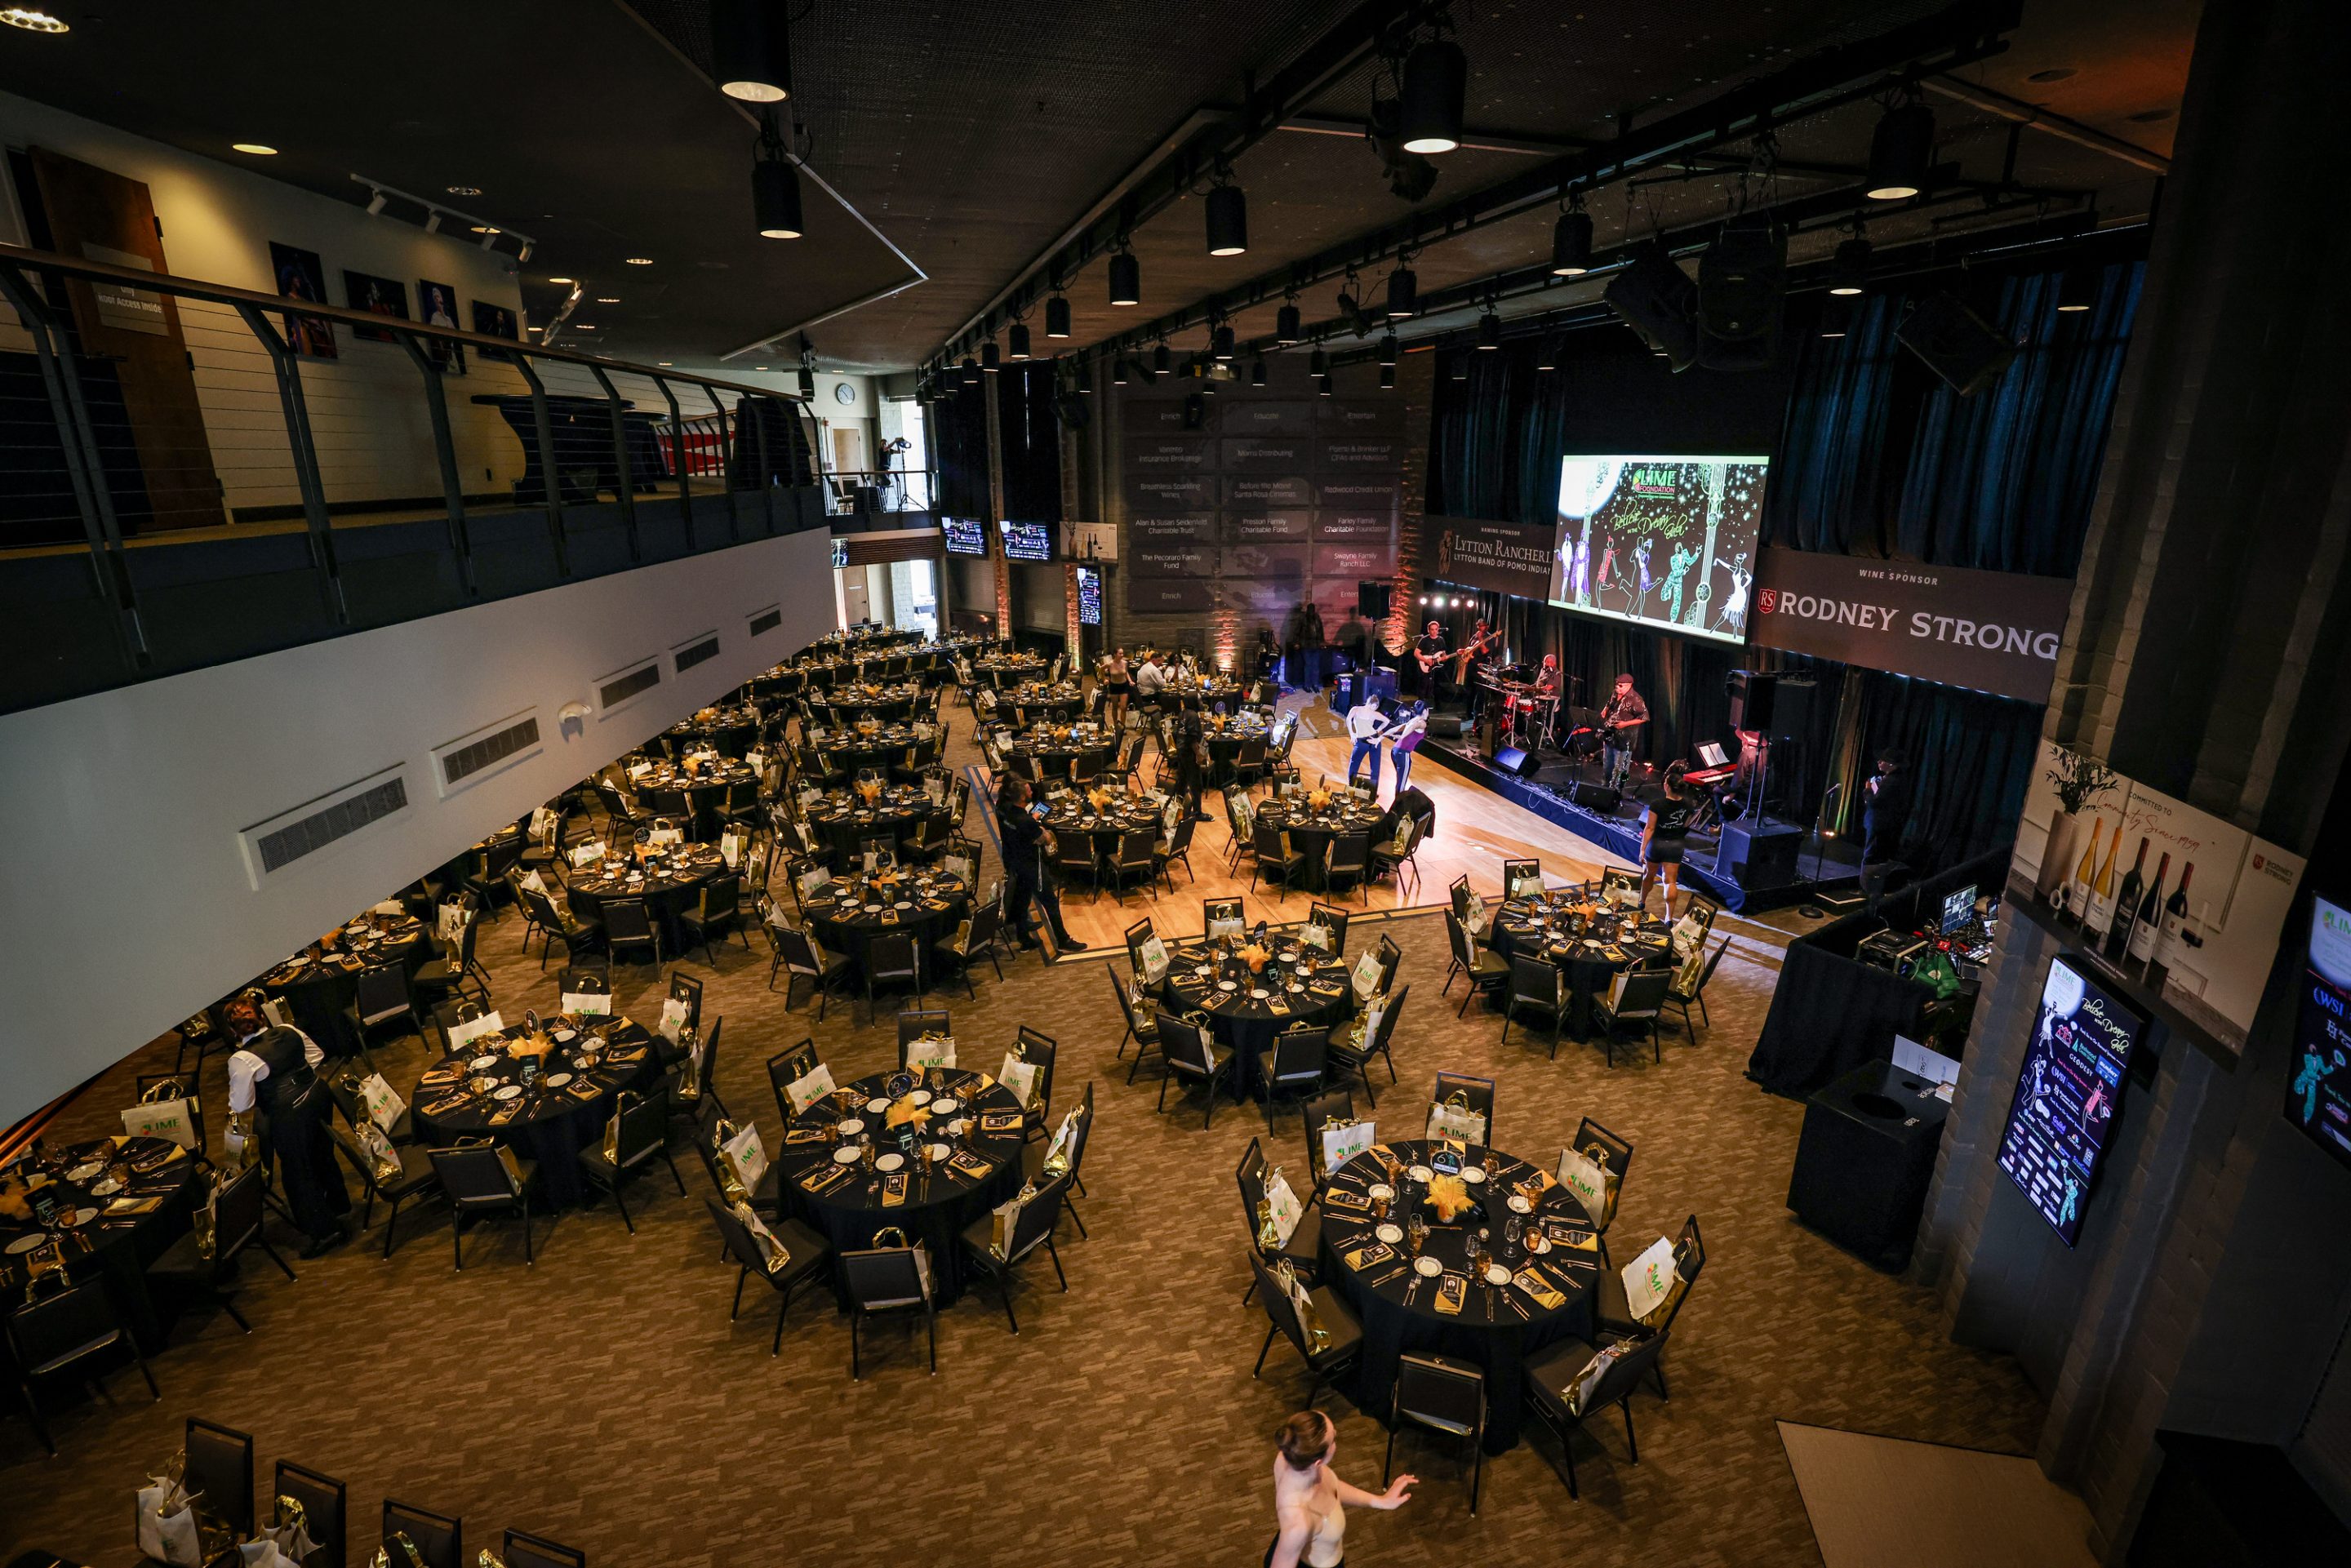 The LIME Foundation of Santa Rosa hosts events in a spacious room with tables, chairs, and a large screen.